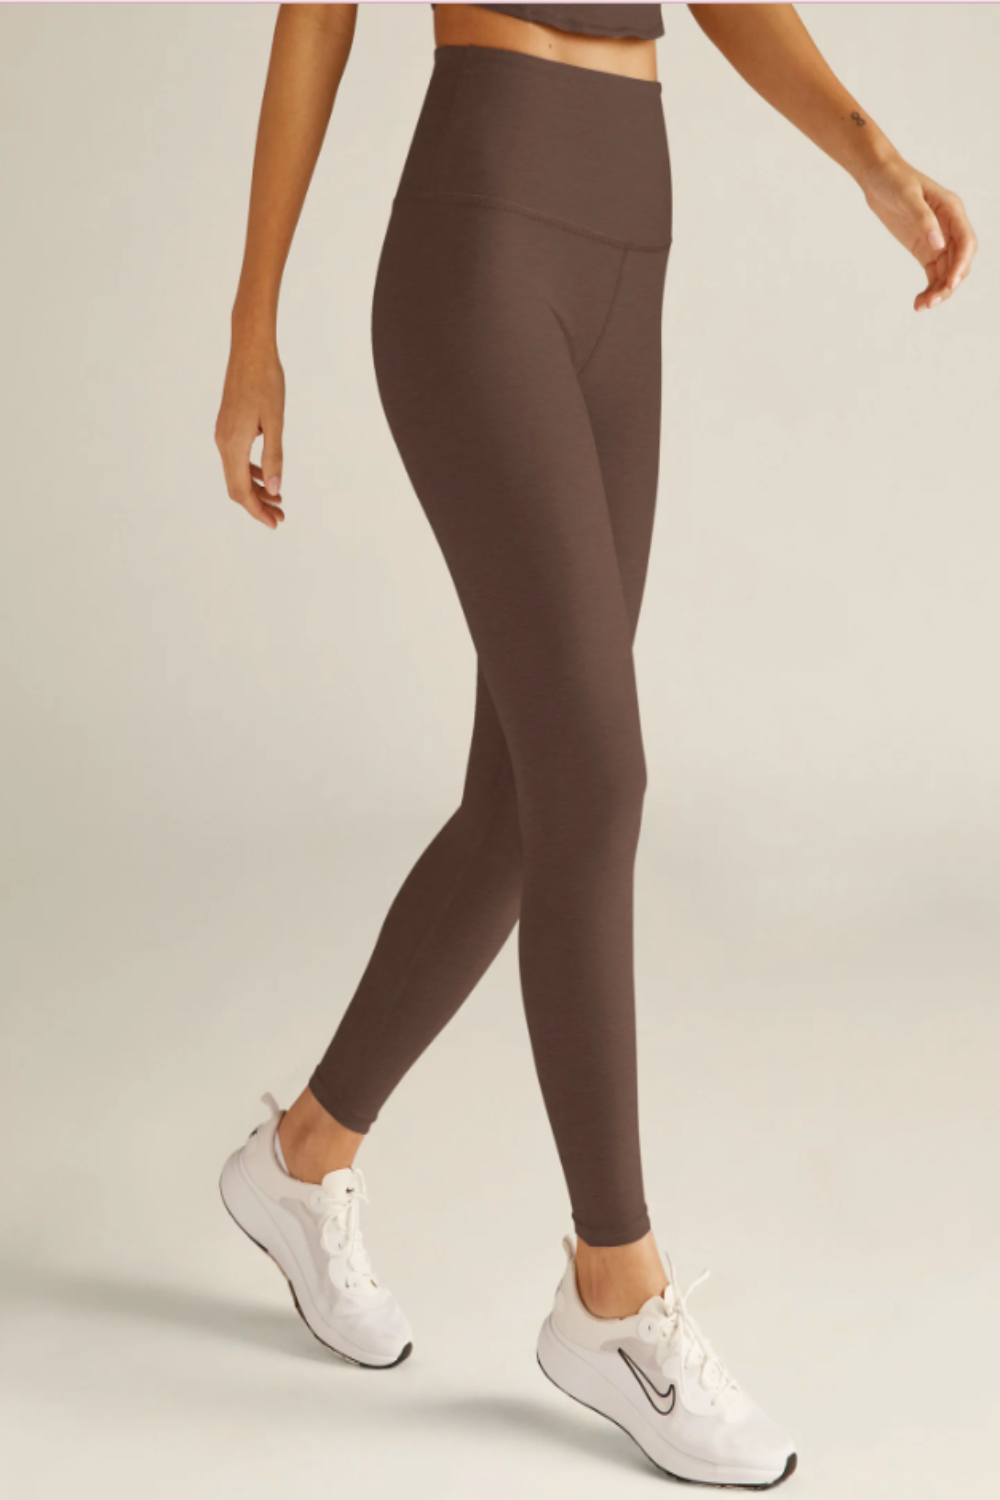 Caught in the Midi High Waisted Legging in Truffle Heather